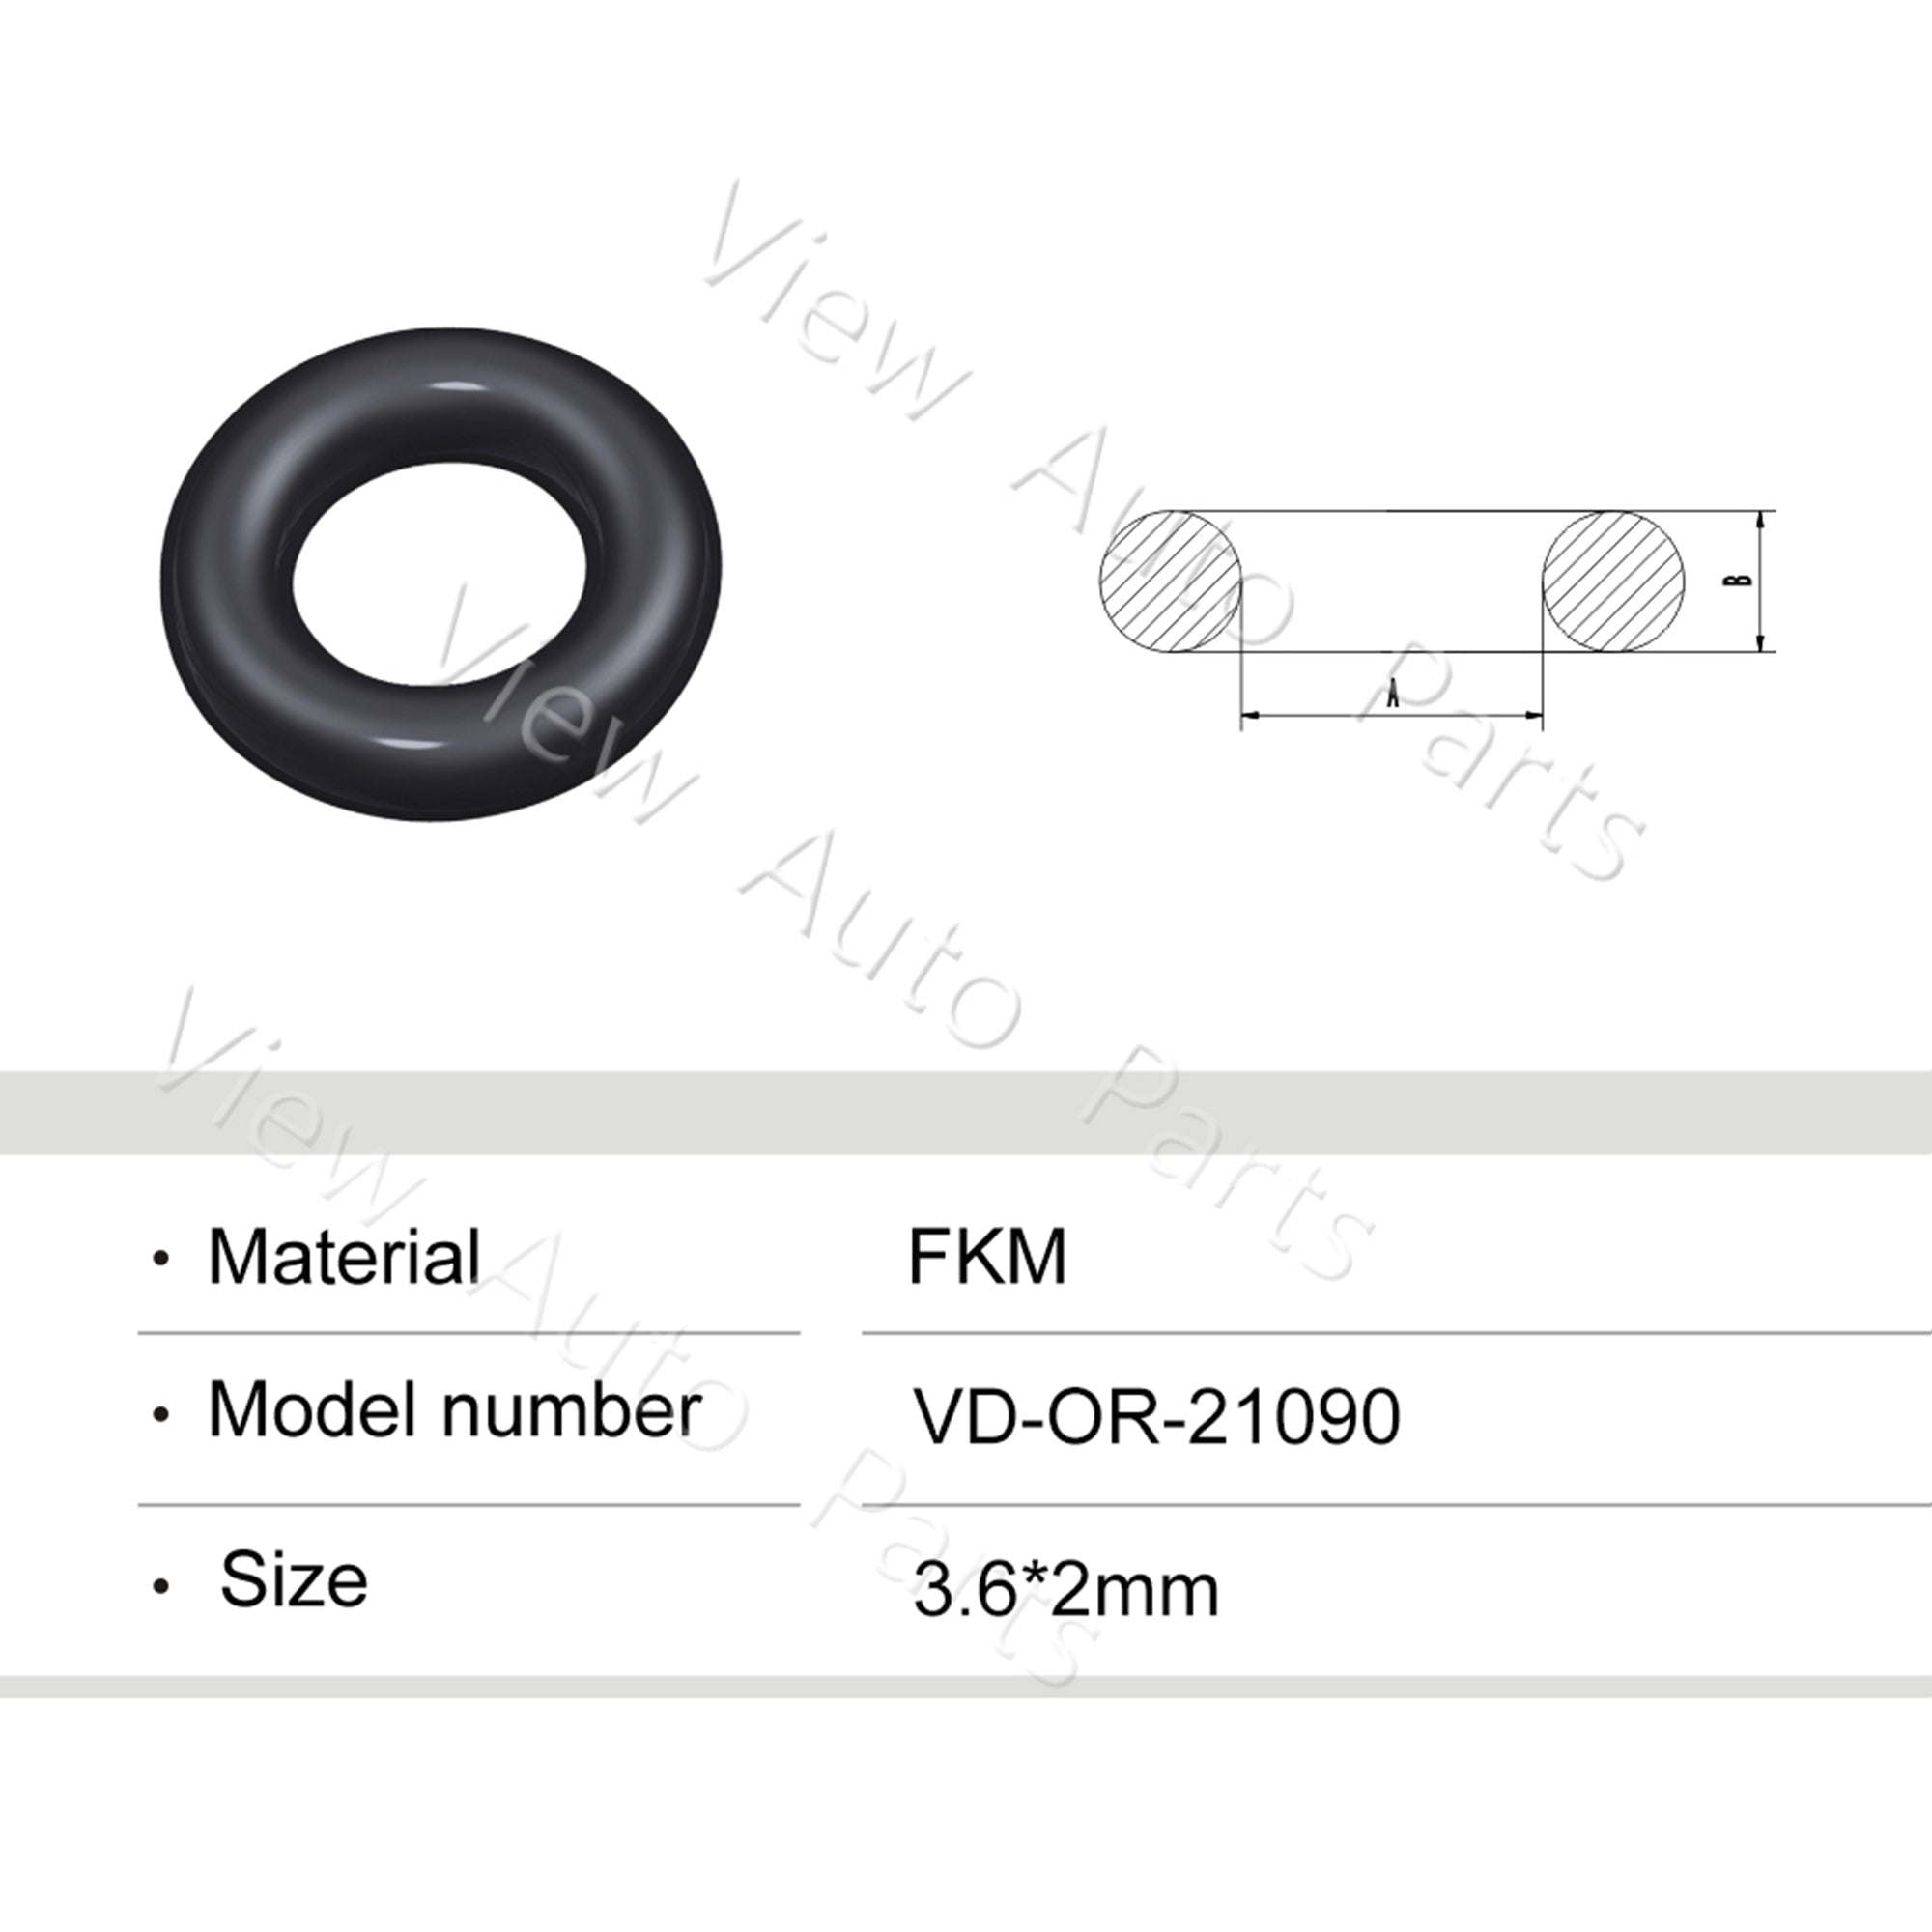 Fuel Injector Rubber Seal Orings for Fuel Injector Repair Kits FKM & Rubber Heat Resistant, Size: 3.6*2mm OR-21090